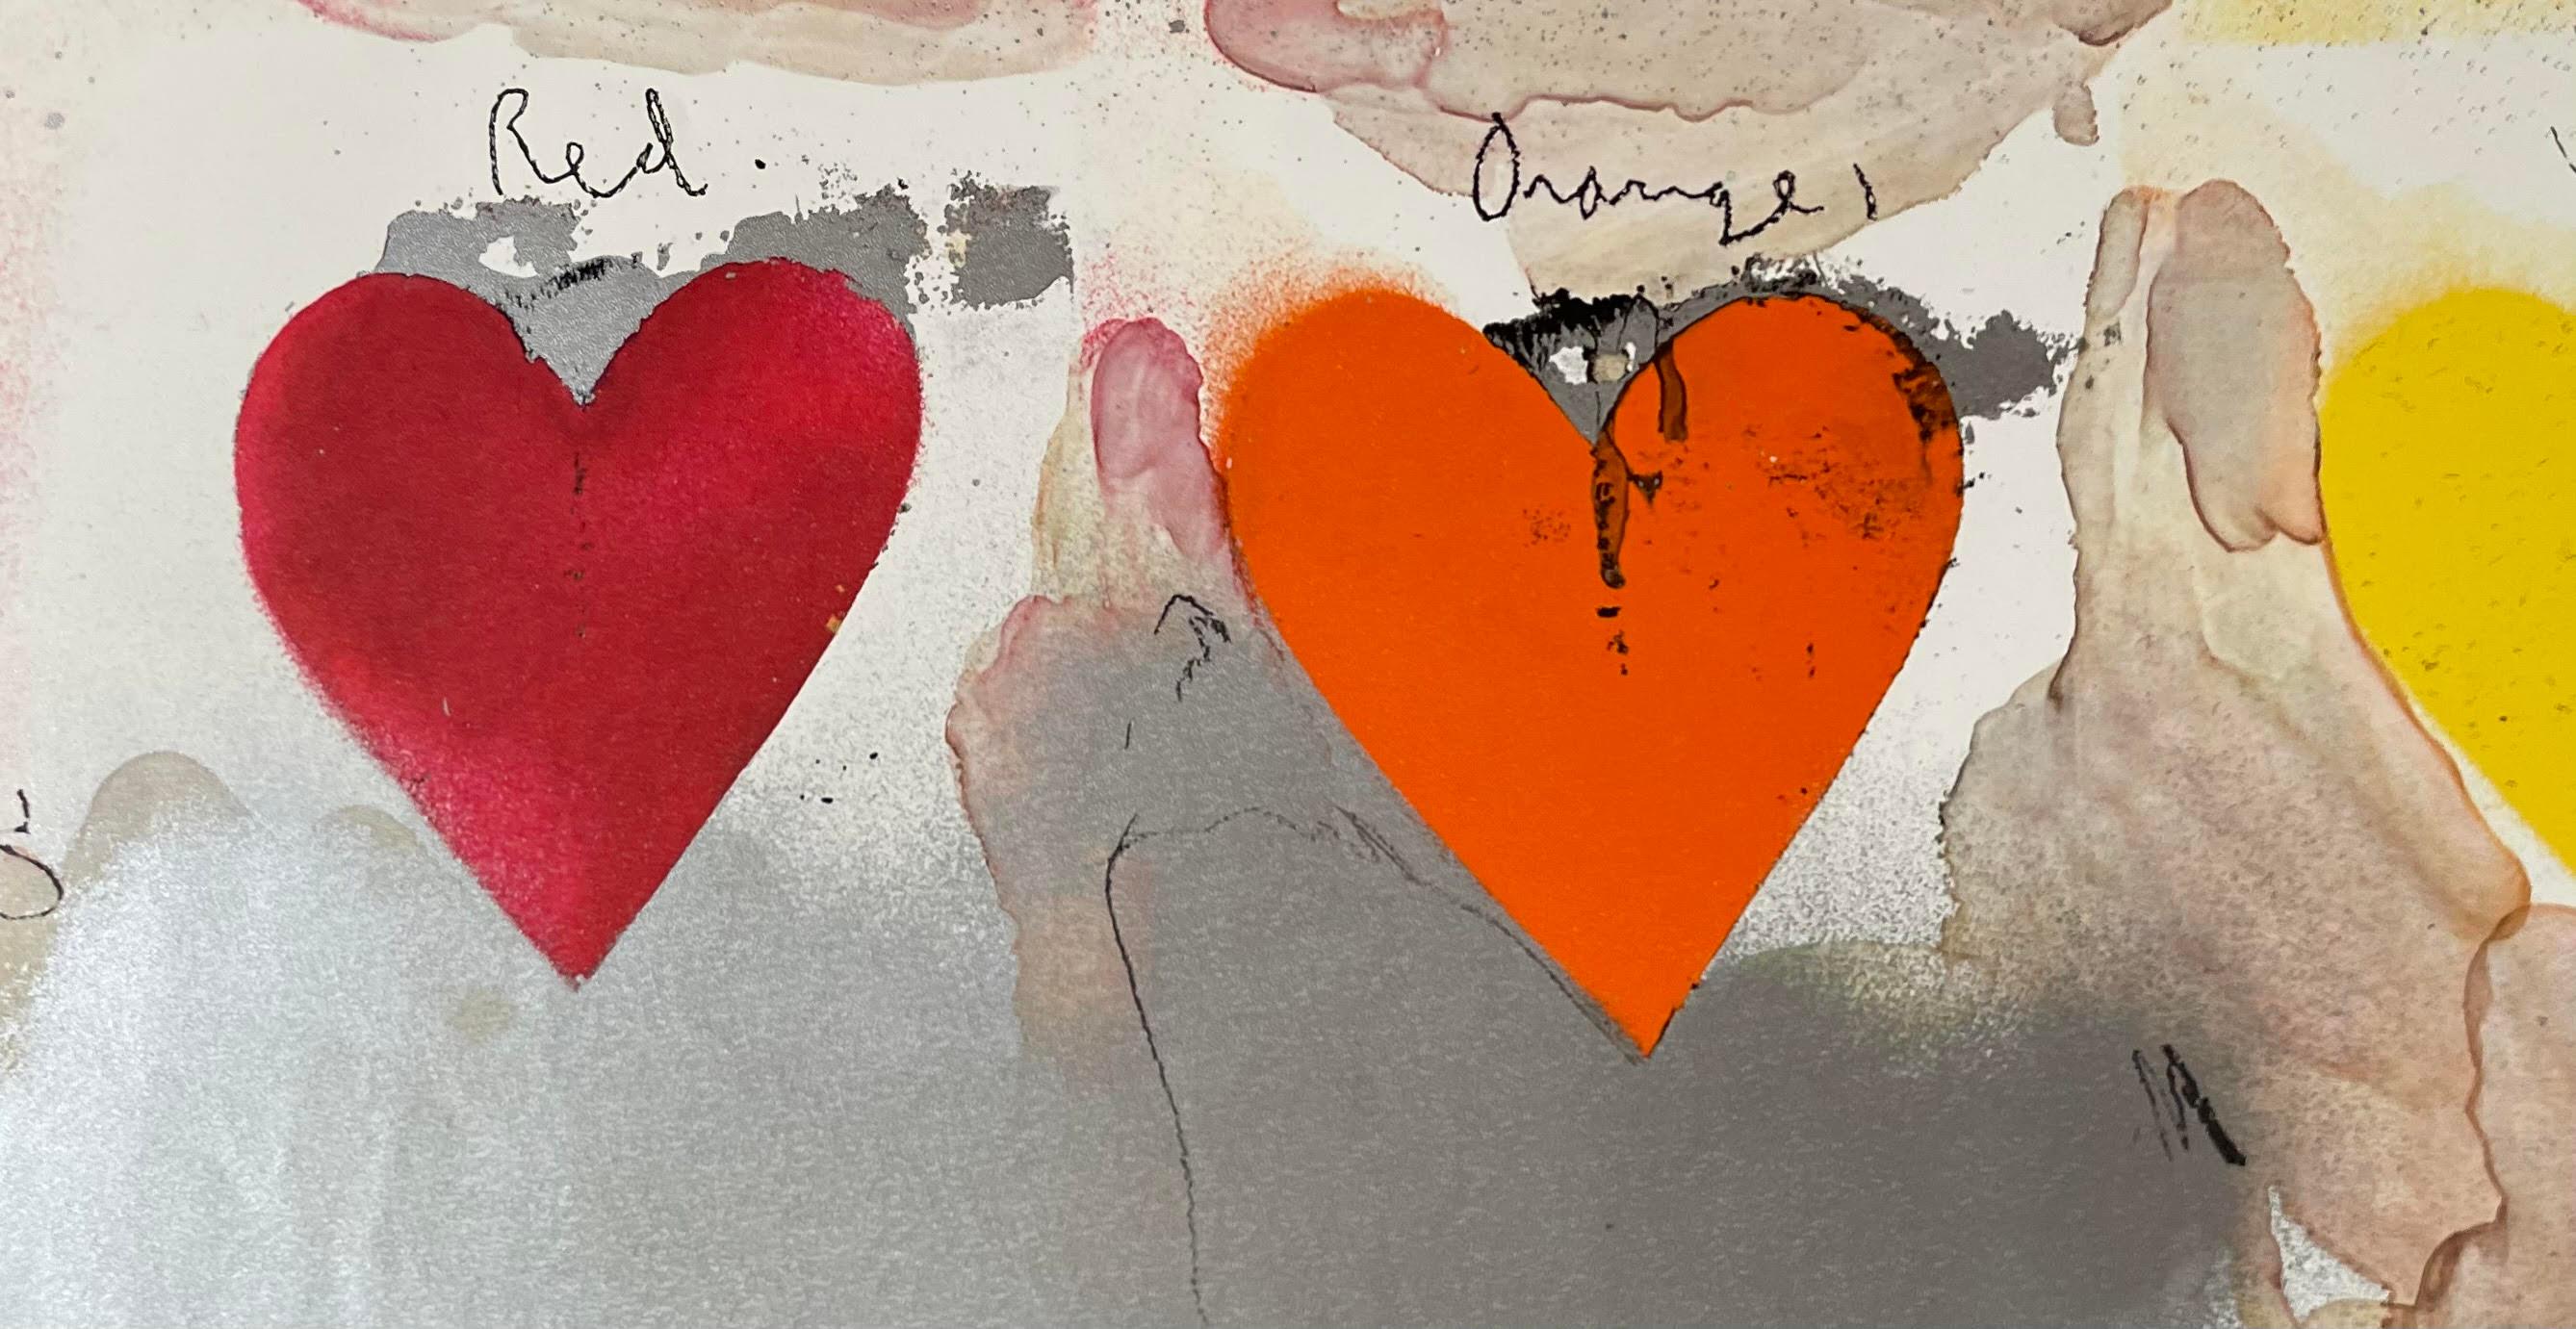 Eight Hearts (7 Colored & 1 Rainbow Heart) -Original limited ed. European poster - Print by Jim Dine